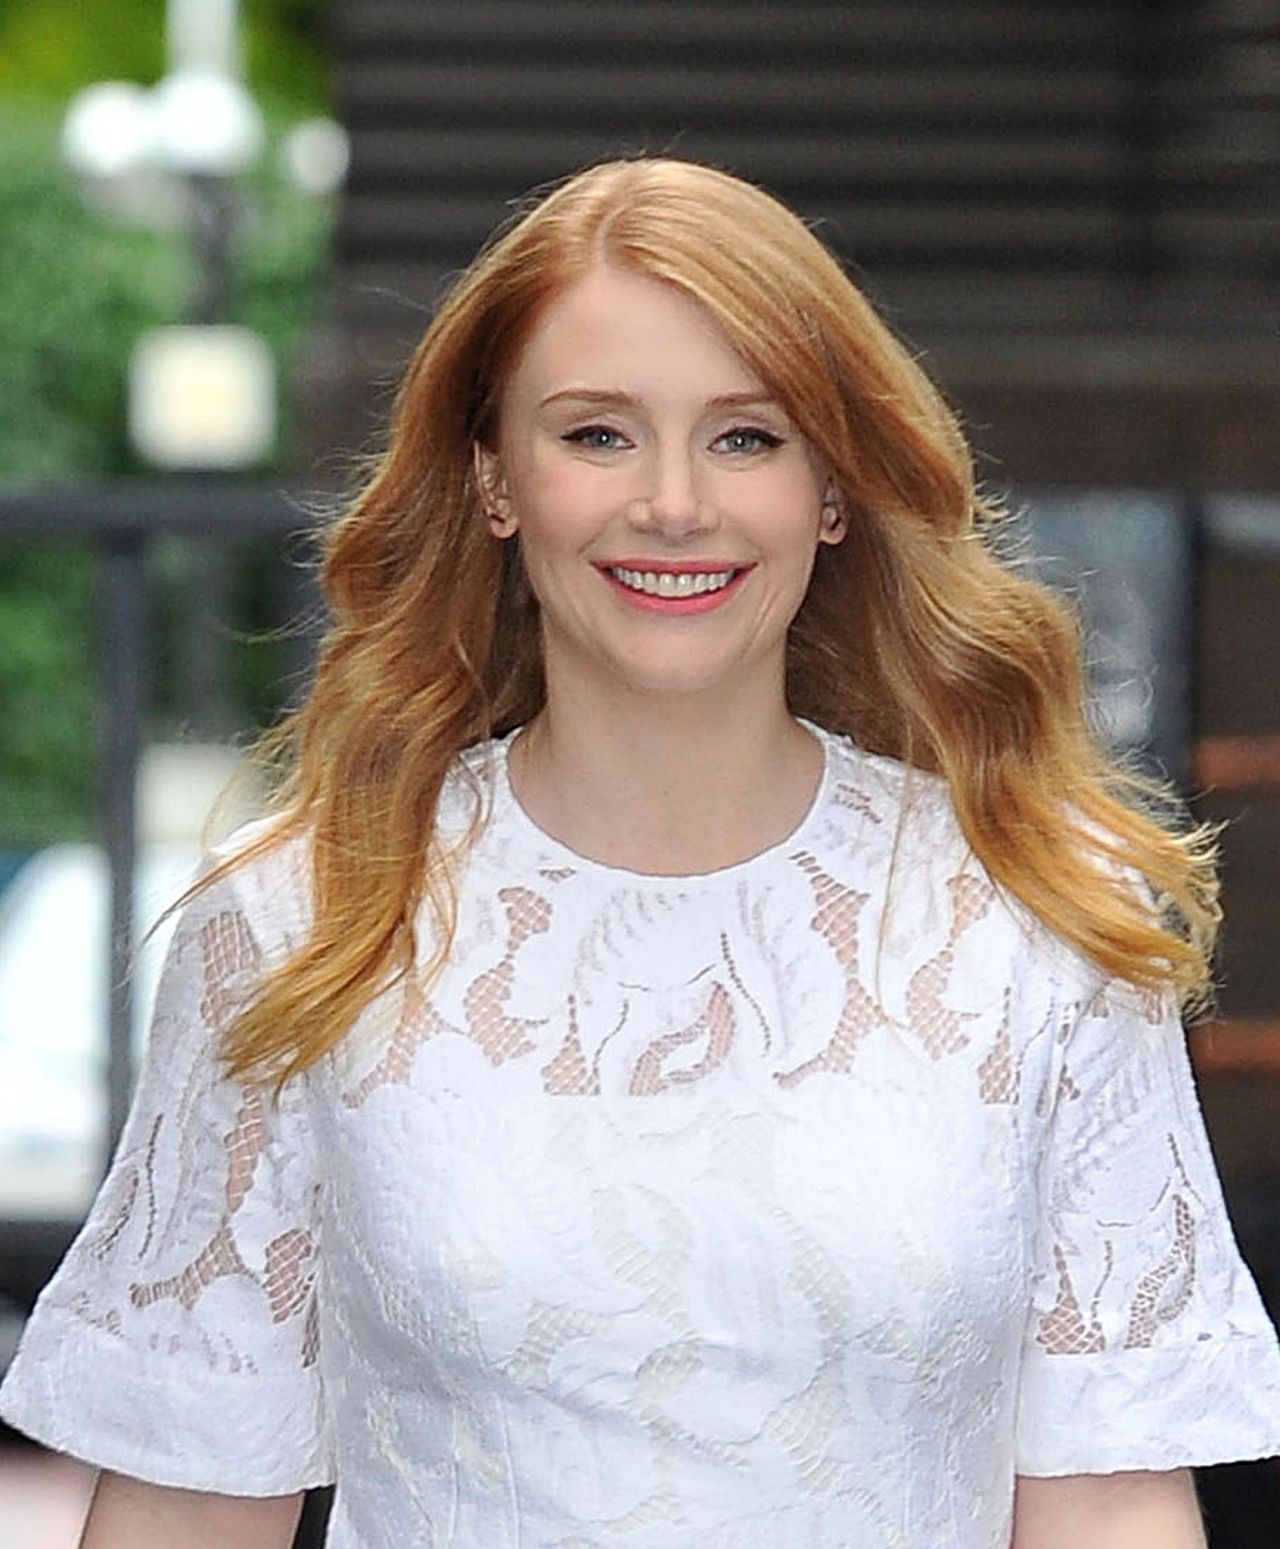 Top 91+ Images pictures of bryce dallas howard Superb